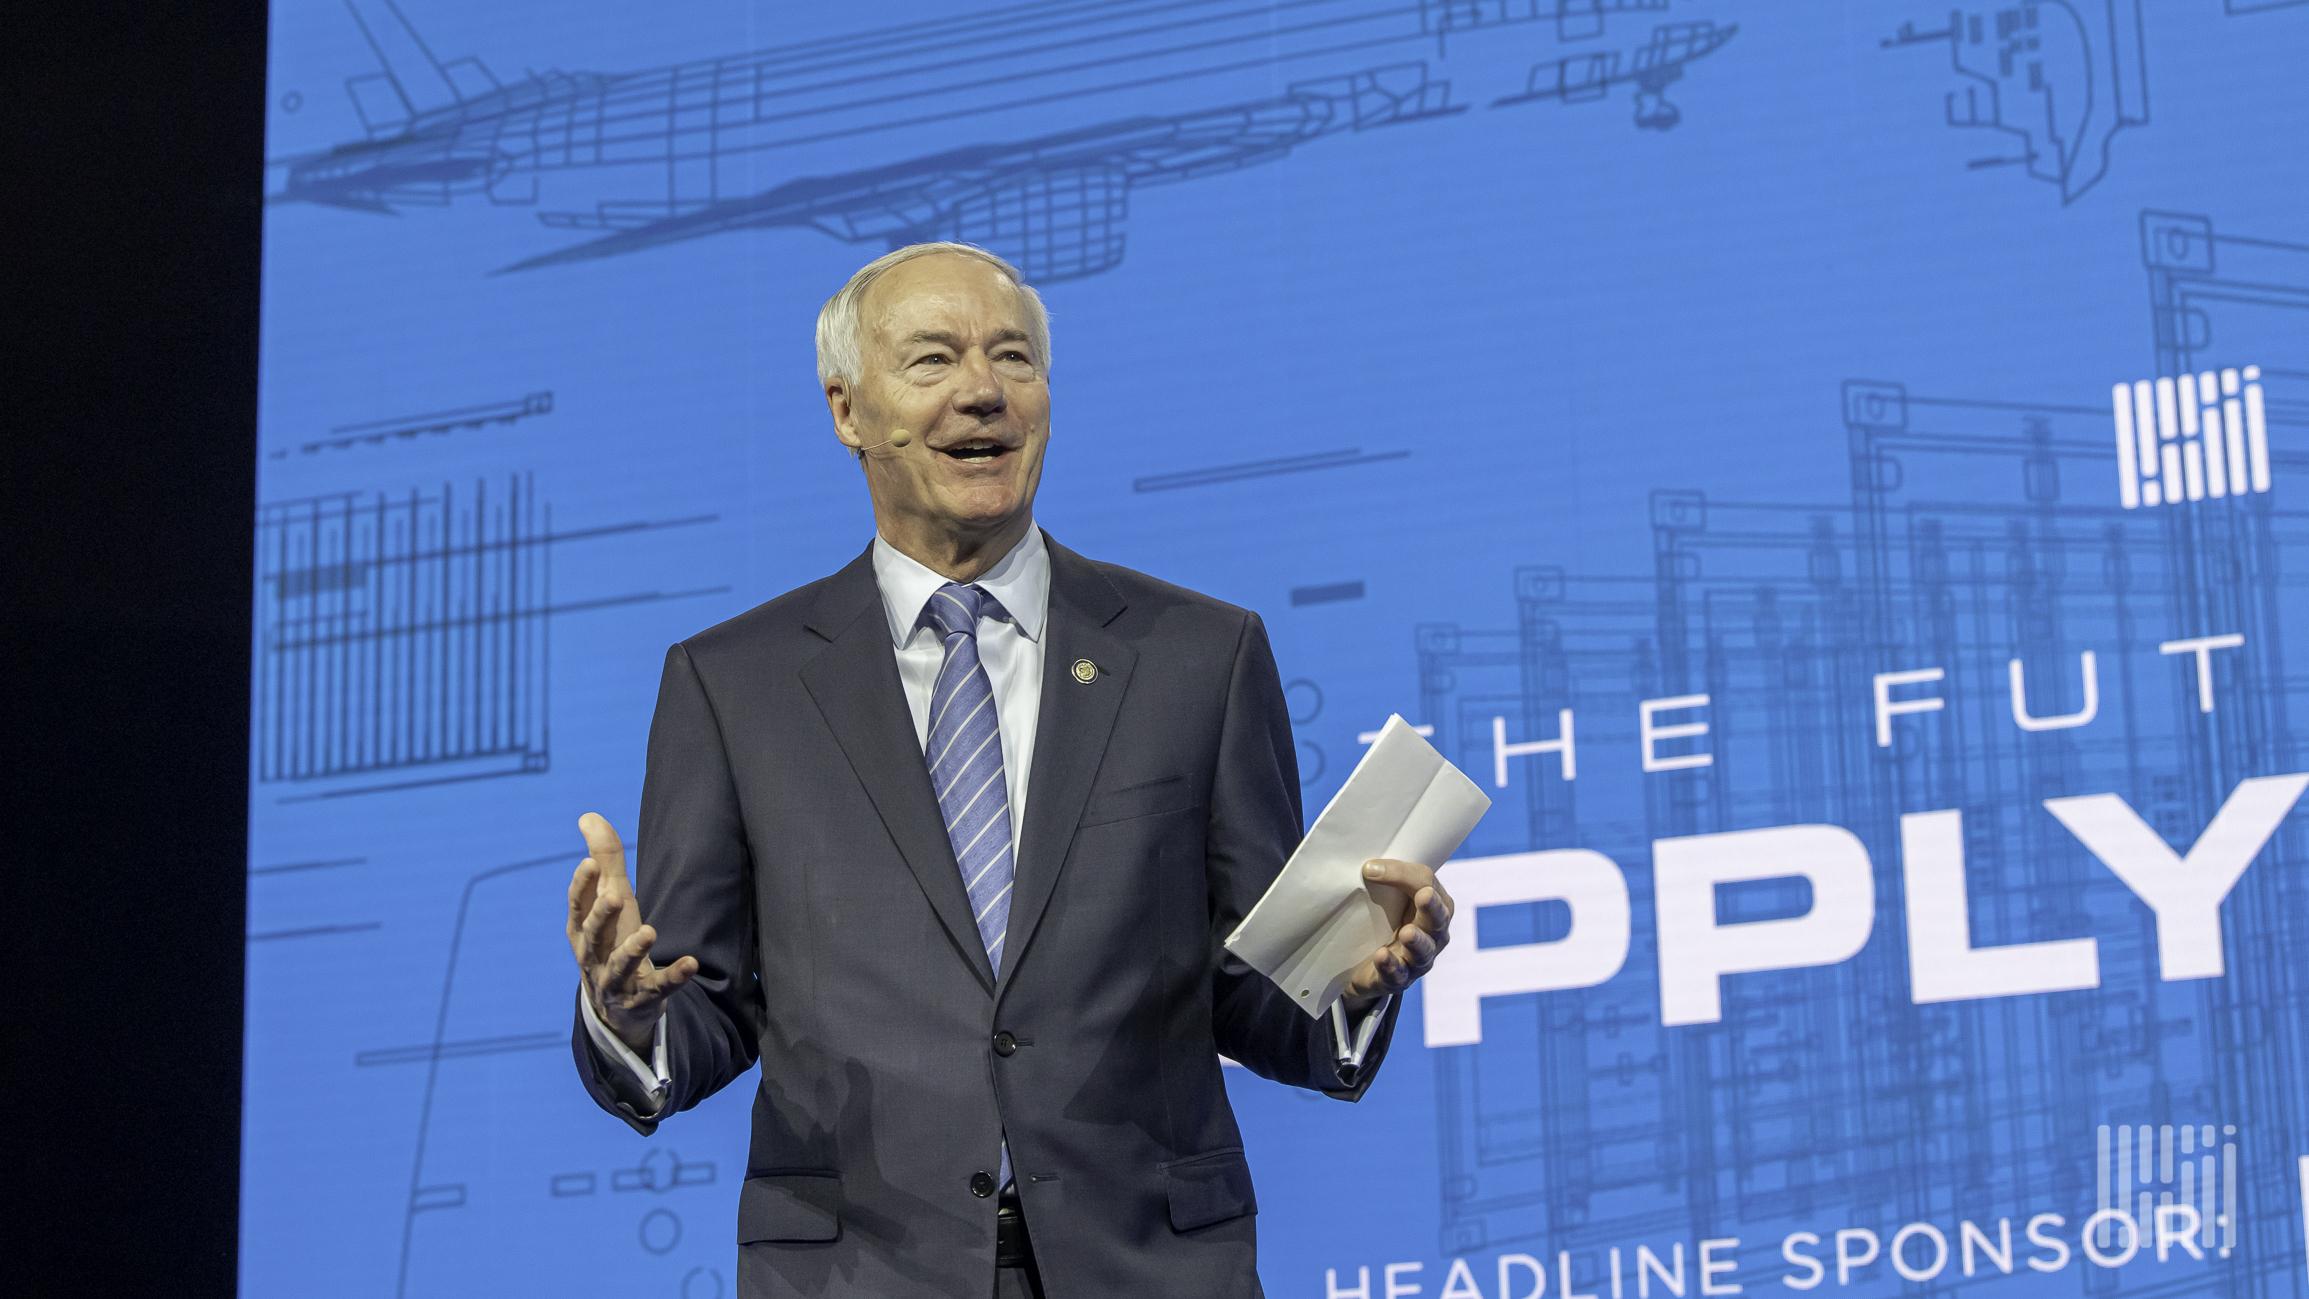 A close-up of Arkansas Governor Asa Hutchinson with arms outstretched talking to an audience.